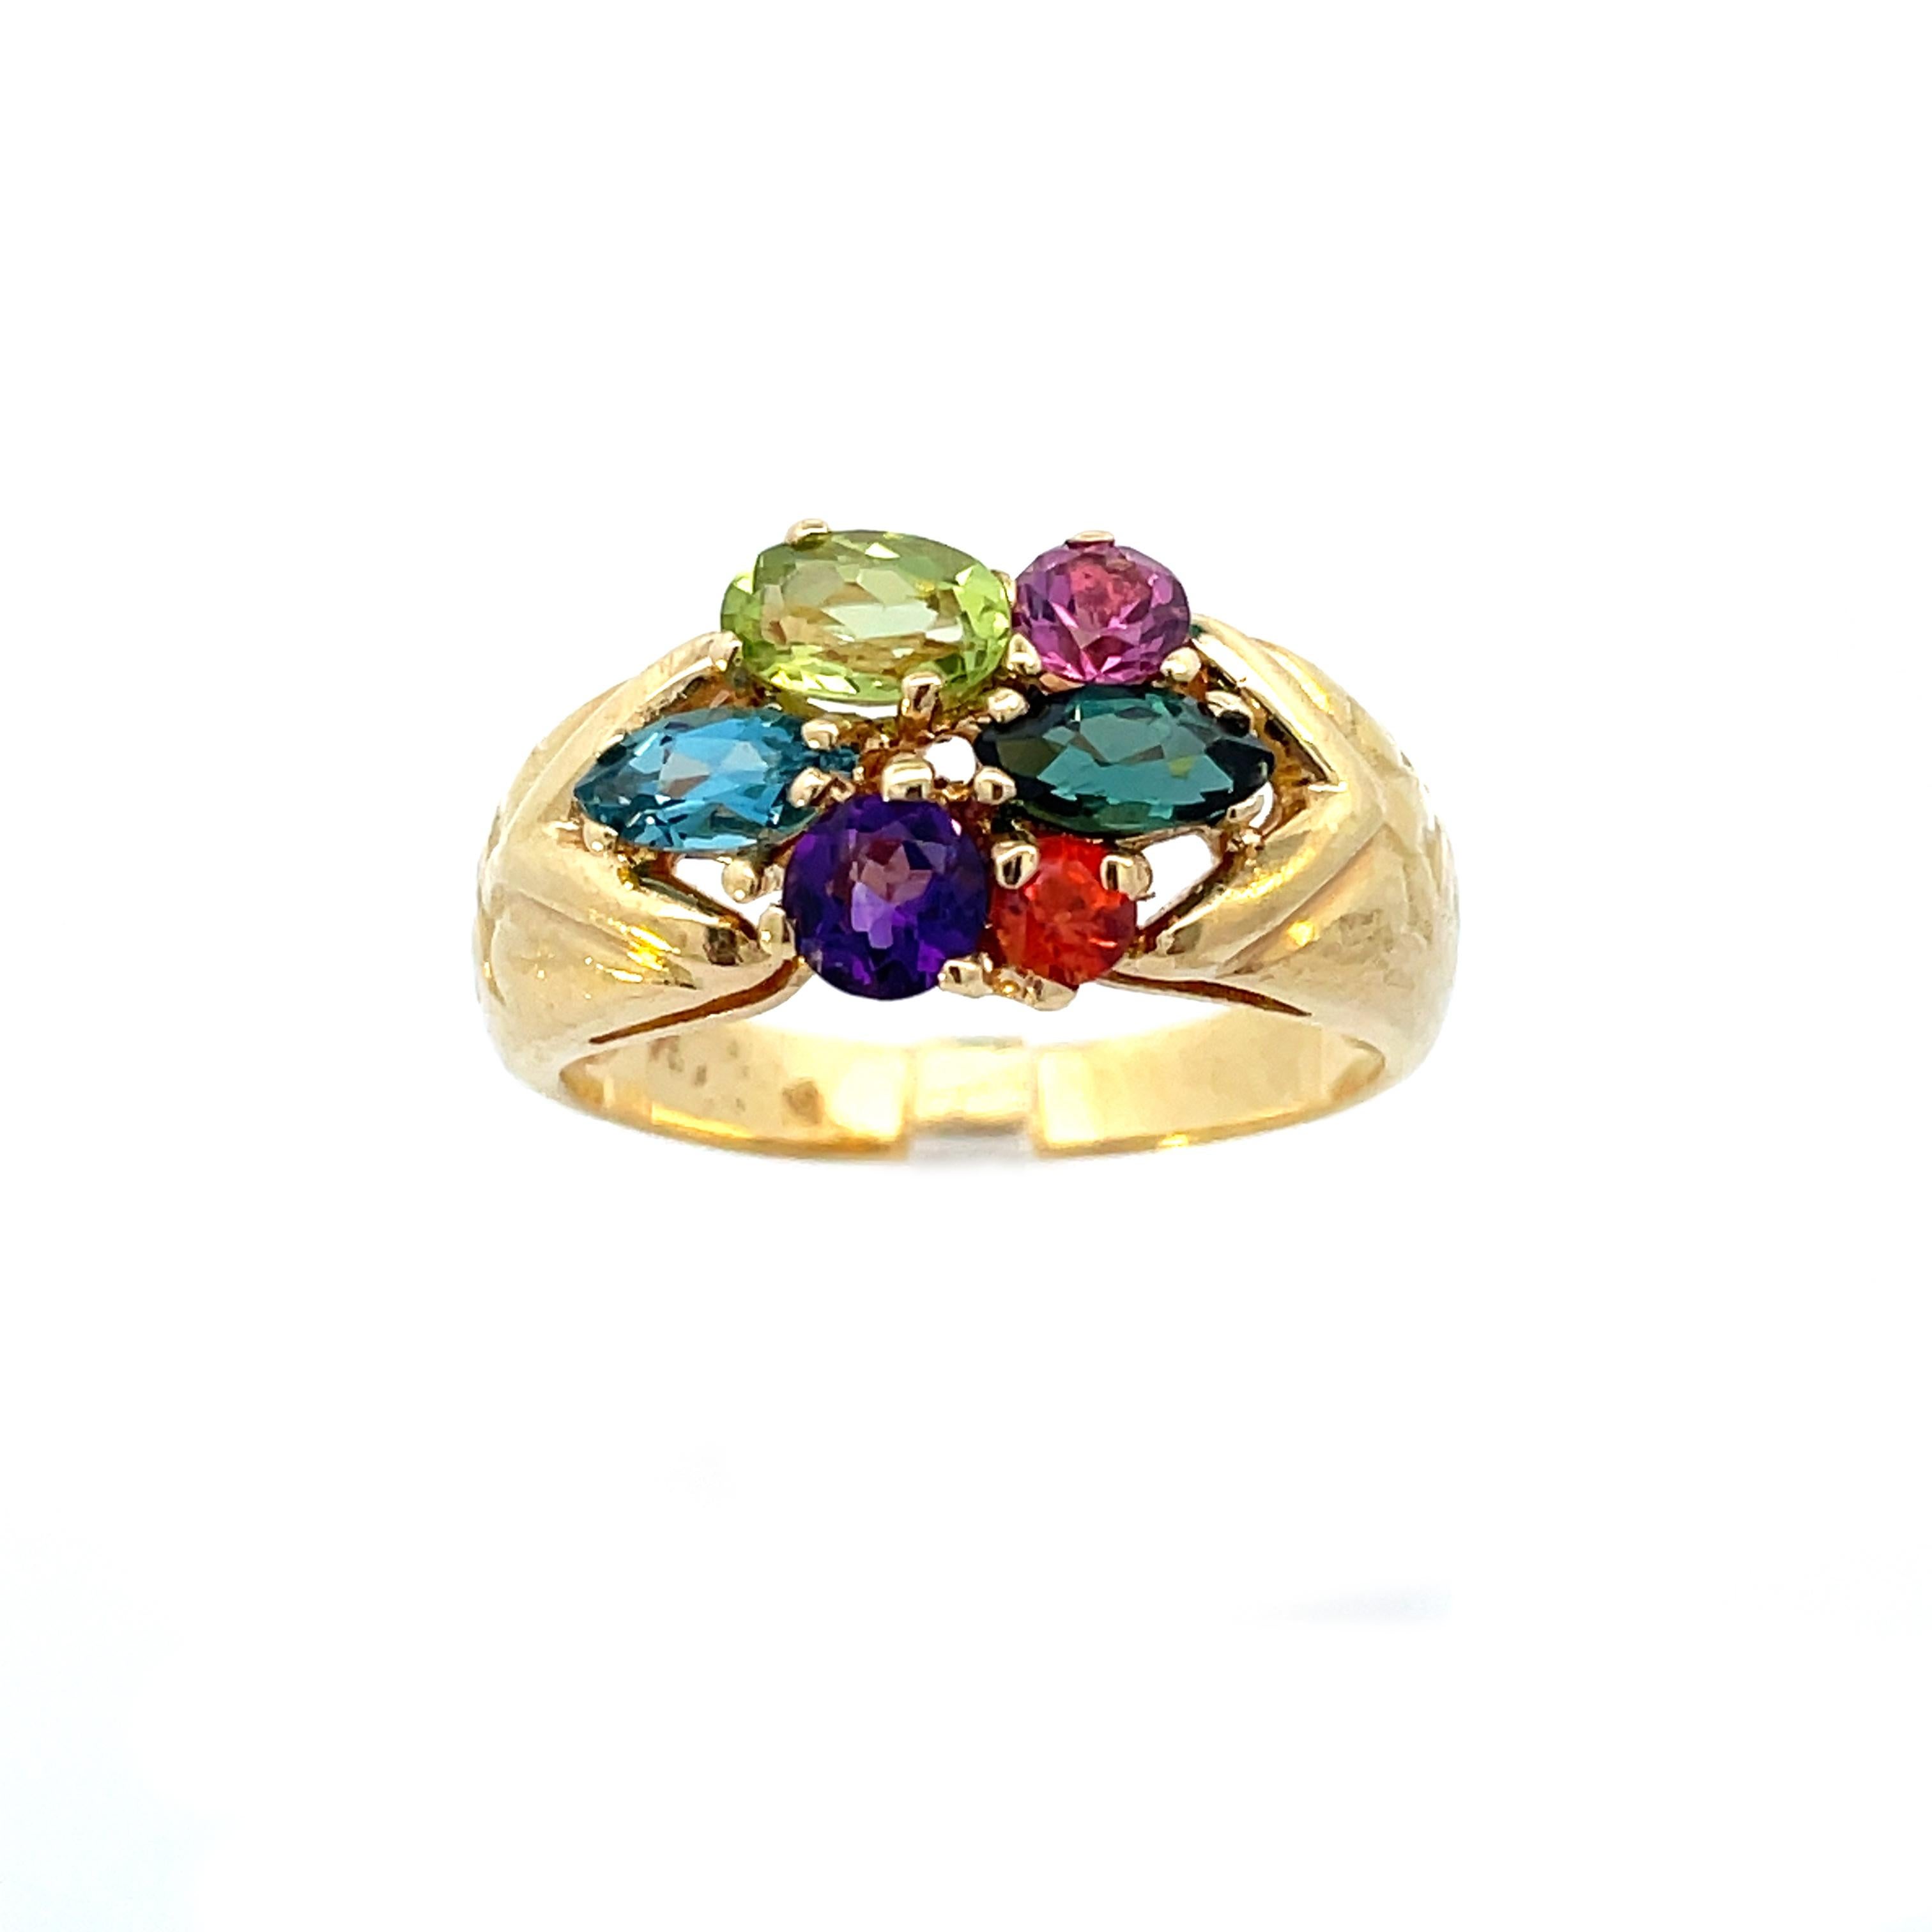 This is a stunning vintage ring signed by famed H. Stern, crafted in beaming 18K yellow gold showcases a dazzling group of vibrant gemstones. This ring is set with six multicolored gemstones in various cuts and set in a unique pattern. The ring